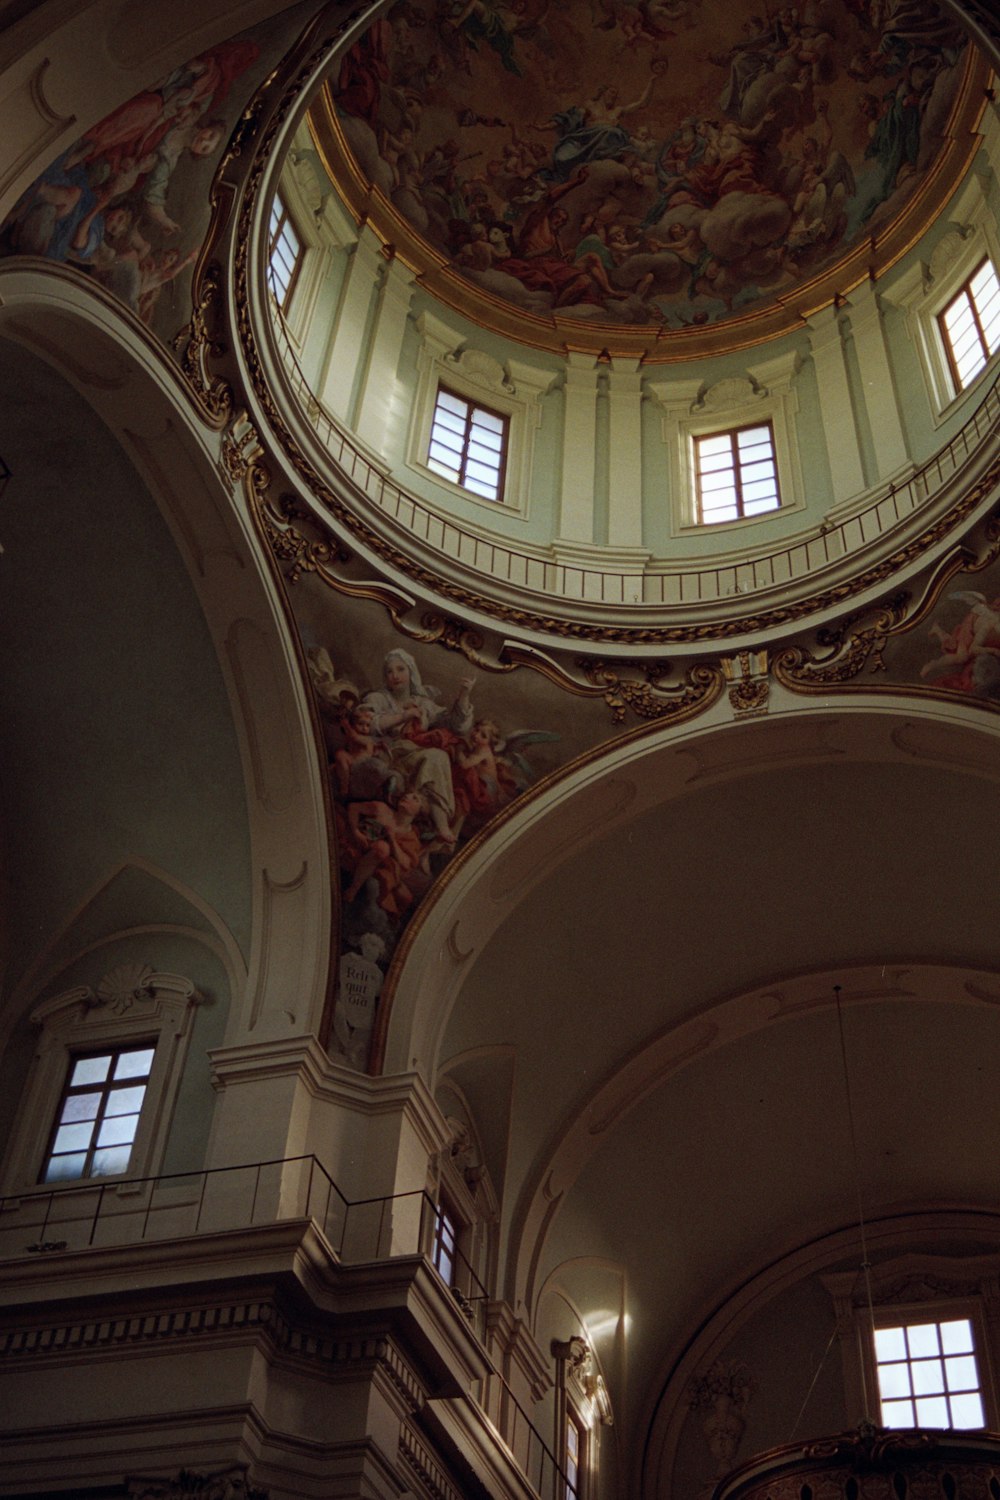 the ceiling of a large building with paintings on it